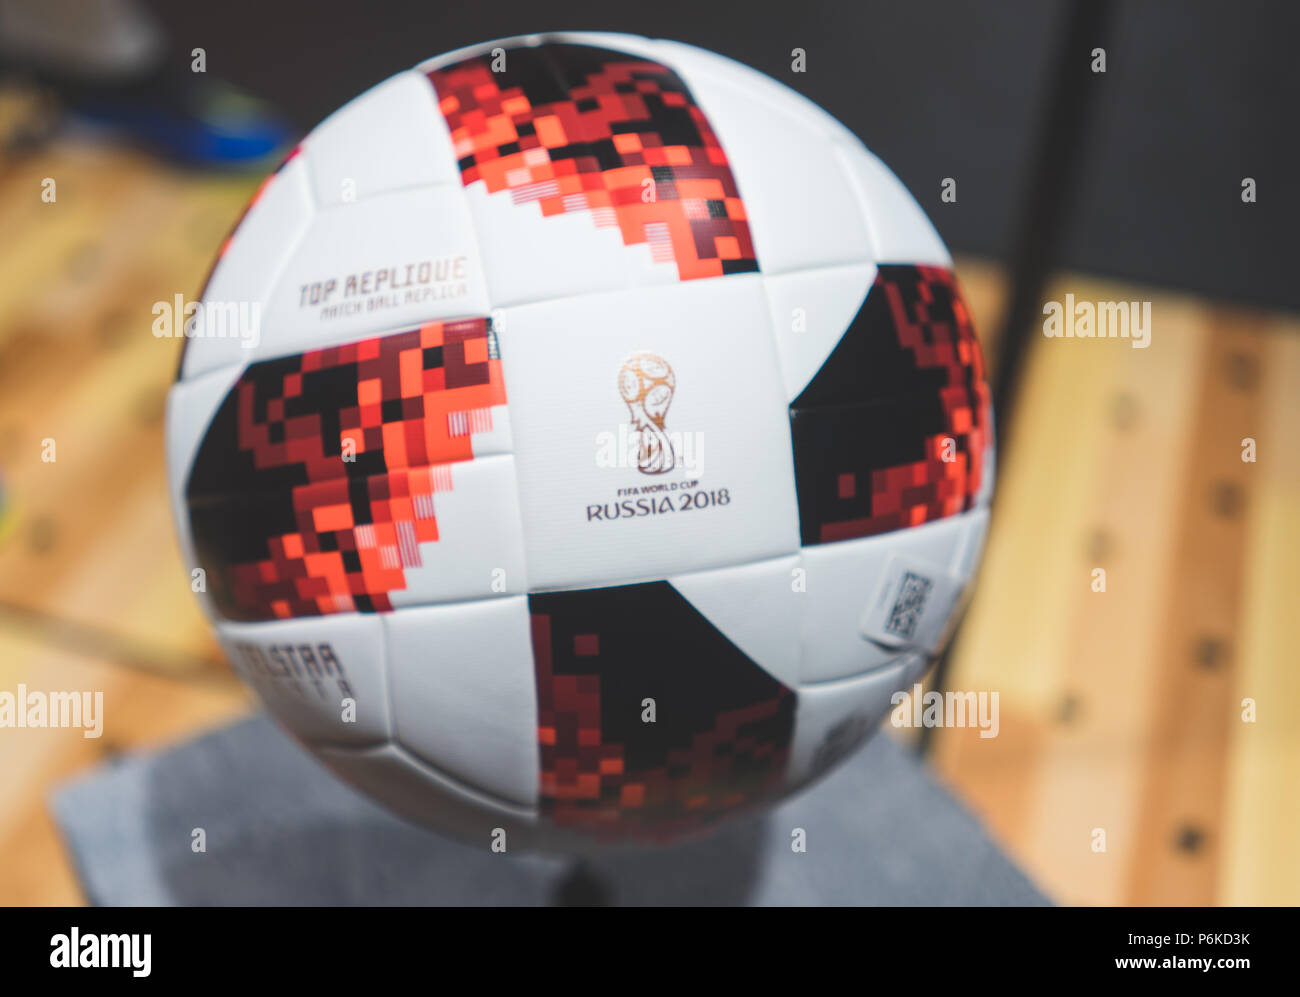 June 30, 2018. The official ball for the FIFA World Cup 2018 football  playoff games Adidas Telstar Mechta Stock Photo - Alamy